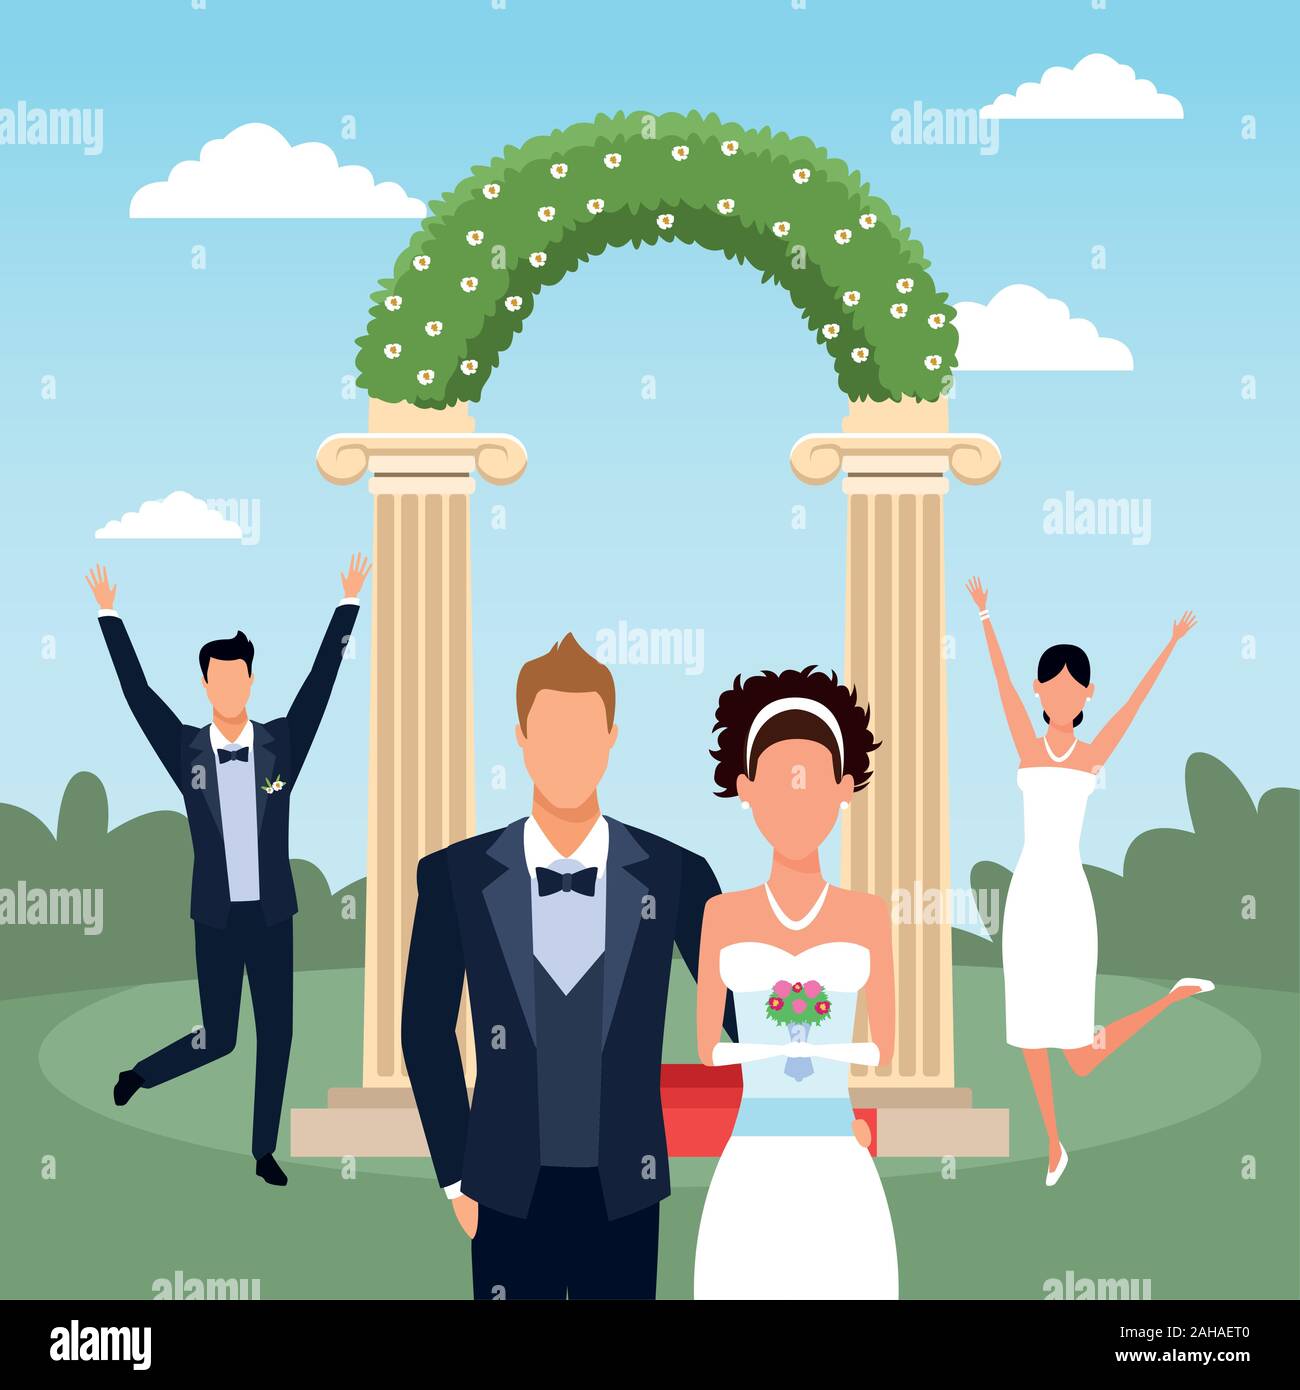 Floral arch with happy just married couples over landscape background Stock Vector